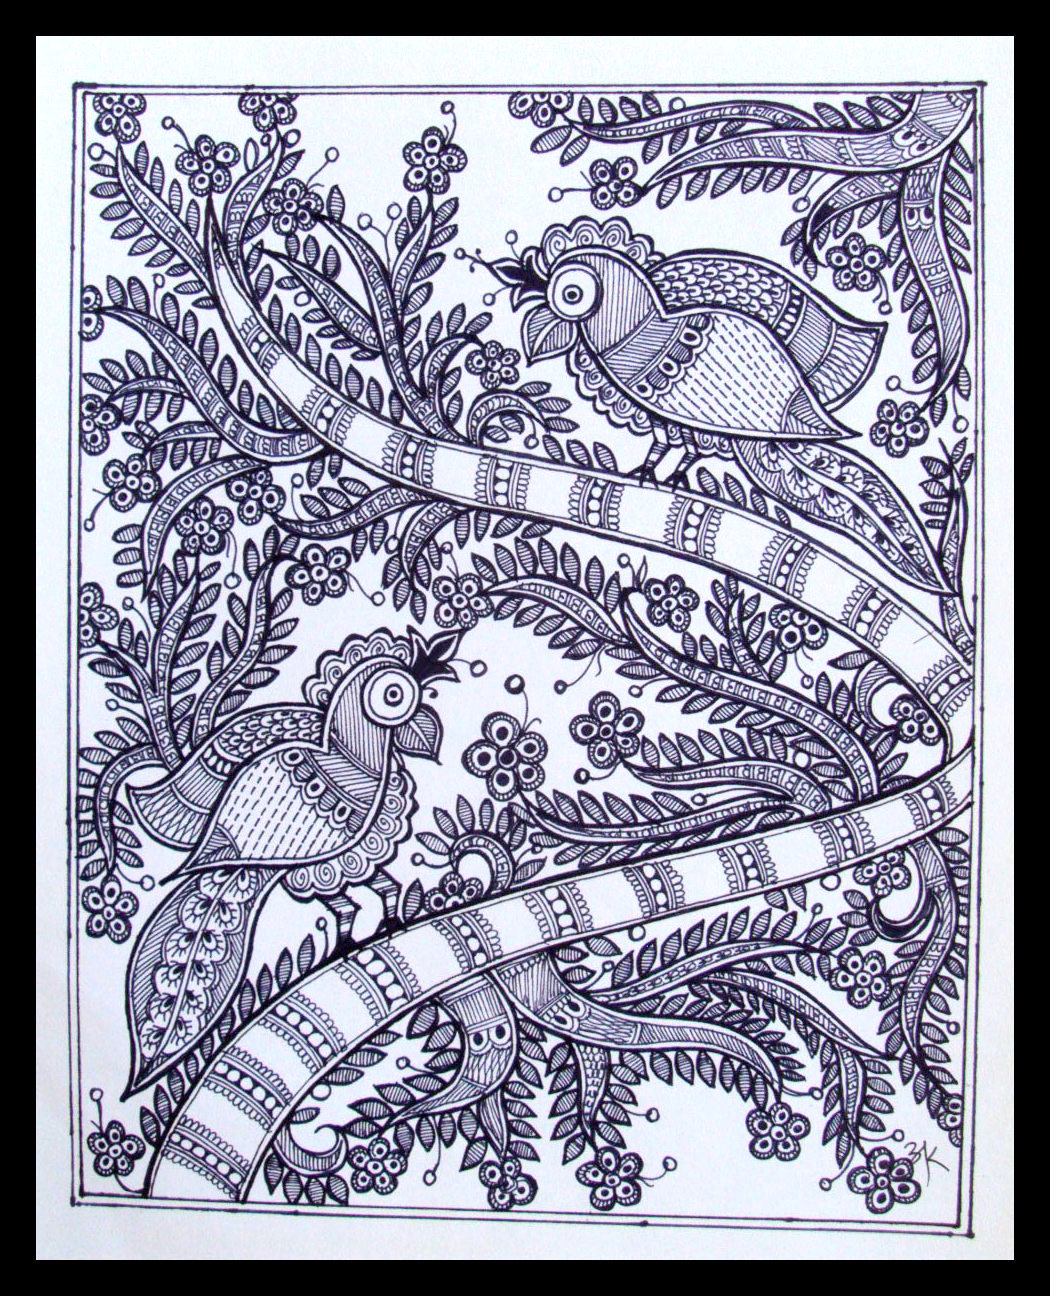 Free Information and News about Handmade Gifts - Handmade Madhubani Paintings - Handmade Gifts India Online - Handmade Giftables for sale